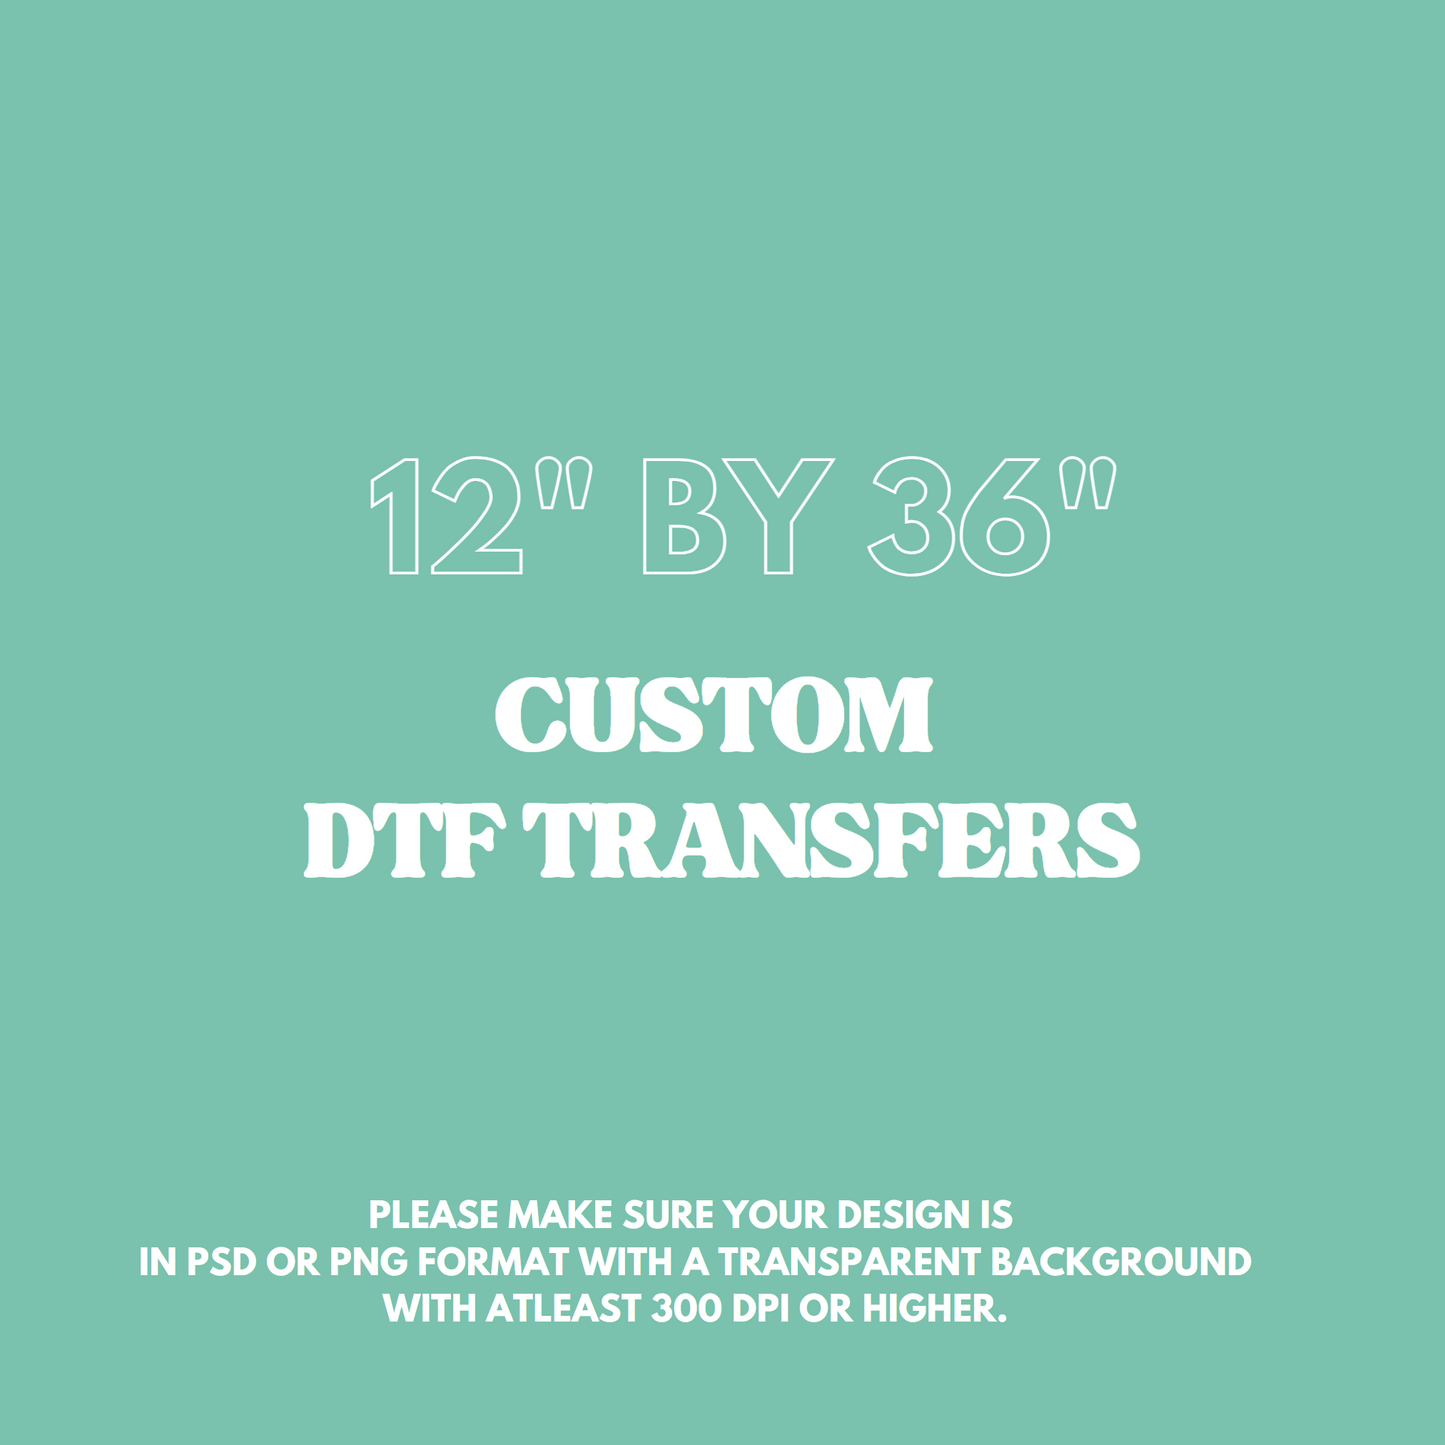 12" by 36": Upload your own DTF Gang sheet